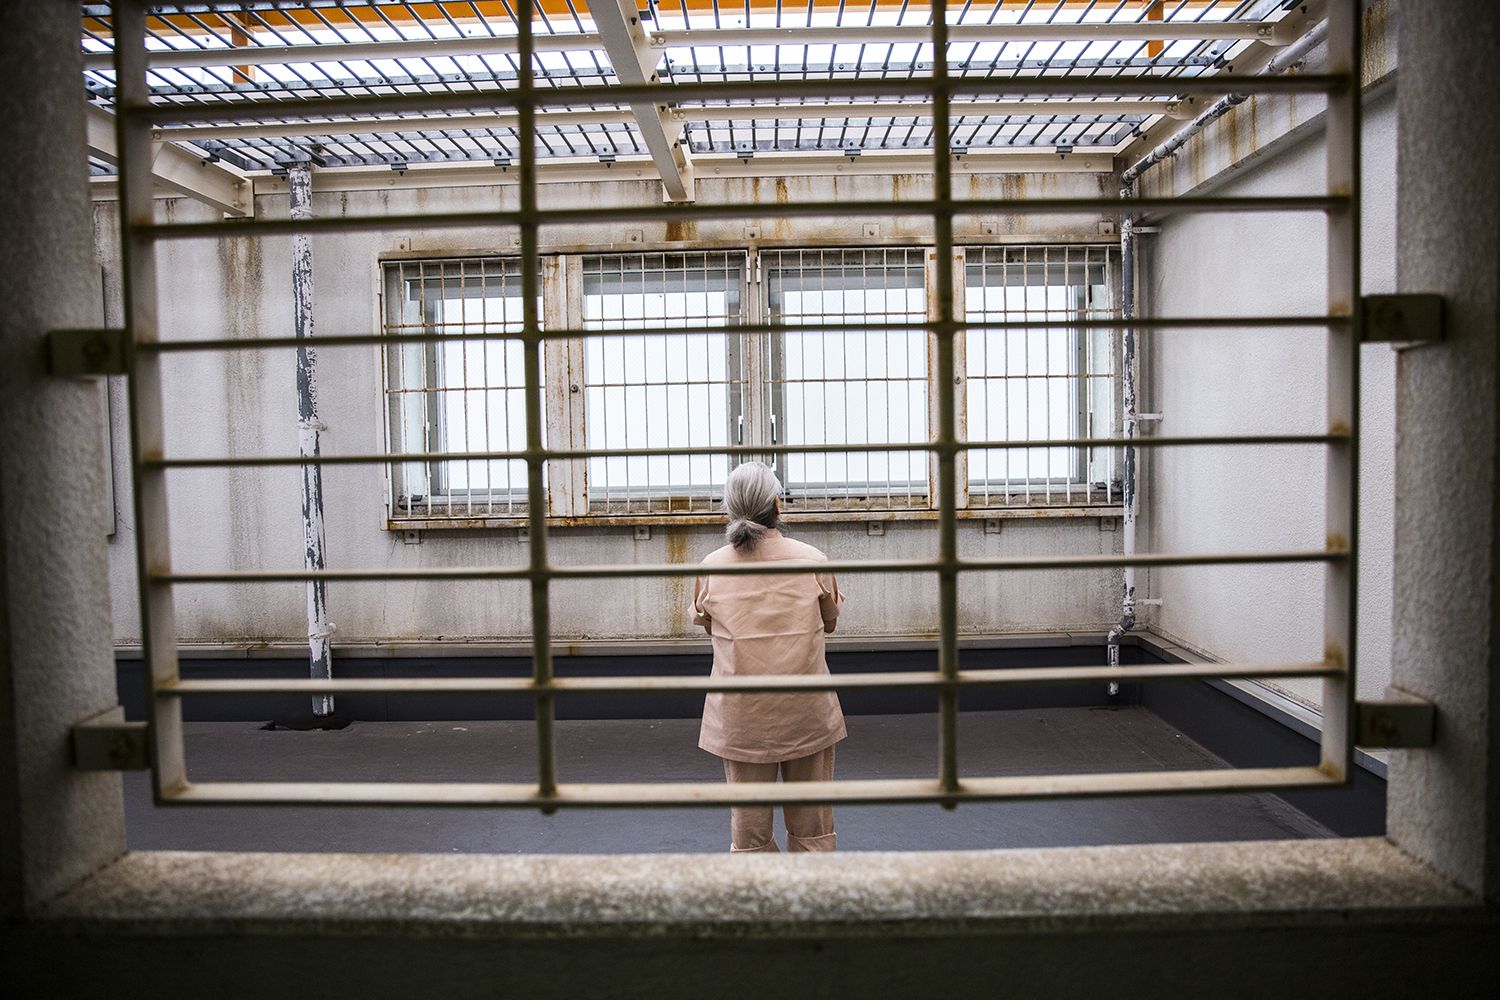 Almost 1 in 5 women in Japanese prisons is a senior. In the vast majoriy of those cases, the women were found guilty of shoplifting.  Image by Shiho Fukada.